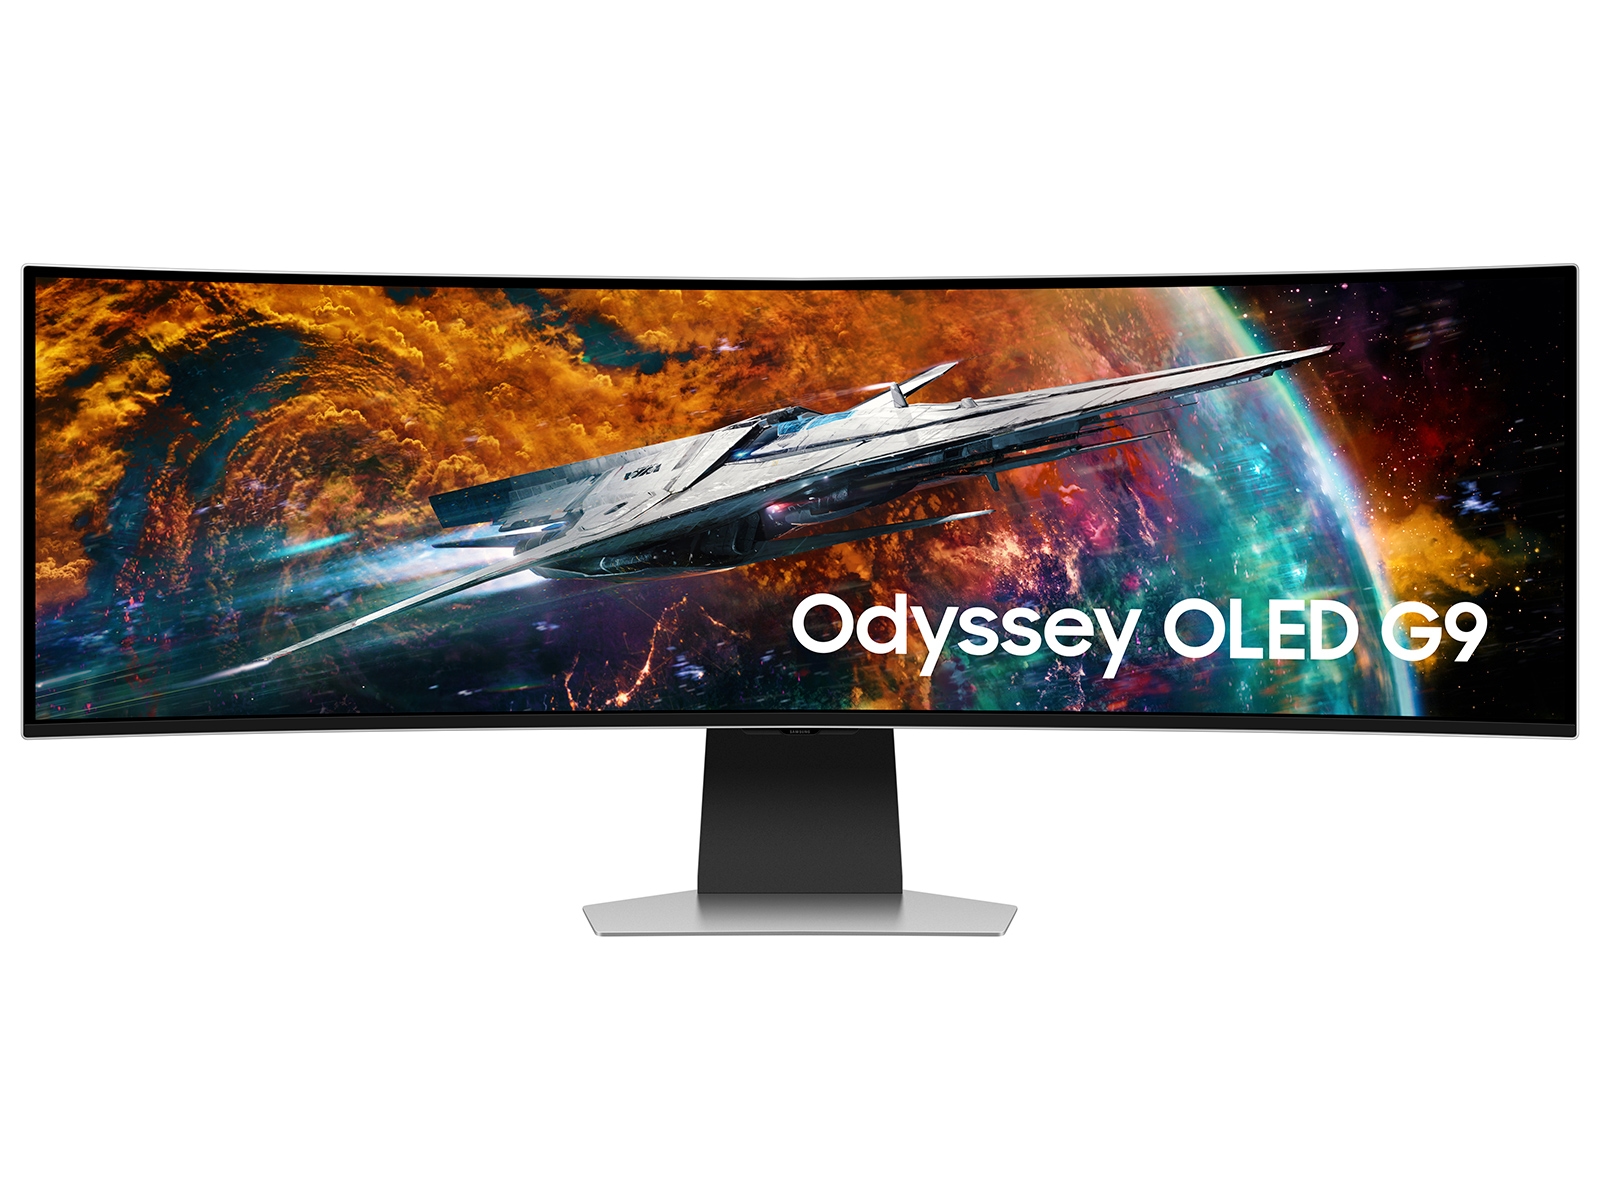 49" Samsung Odyssey OLED G9 240Hz 0.03ms Dual QHD Curved Gaming Monitor $1100 + Free Shipping